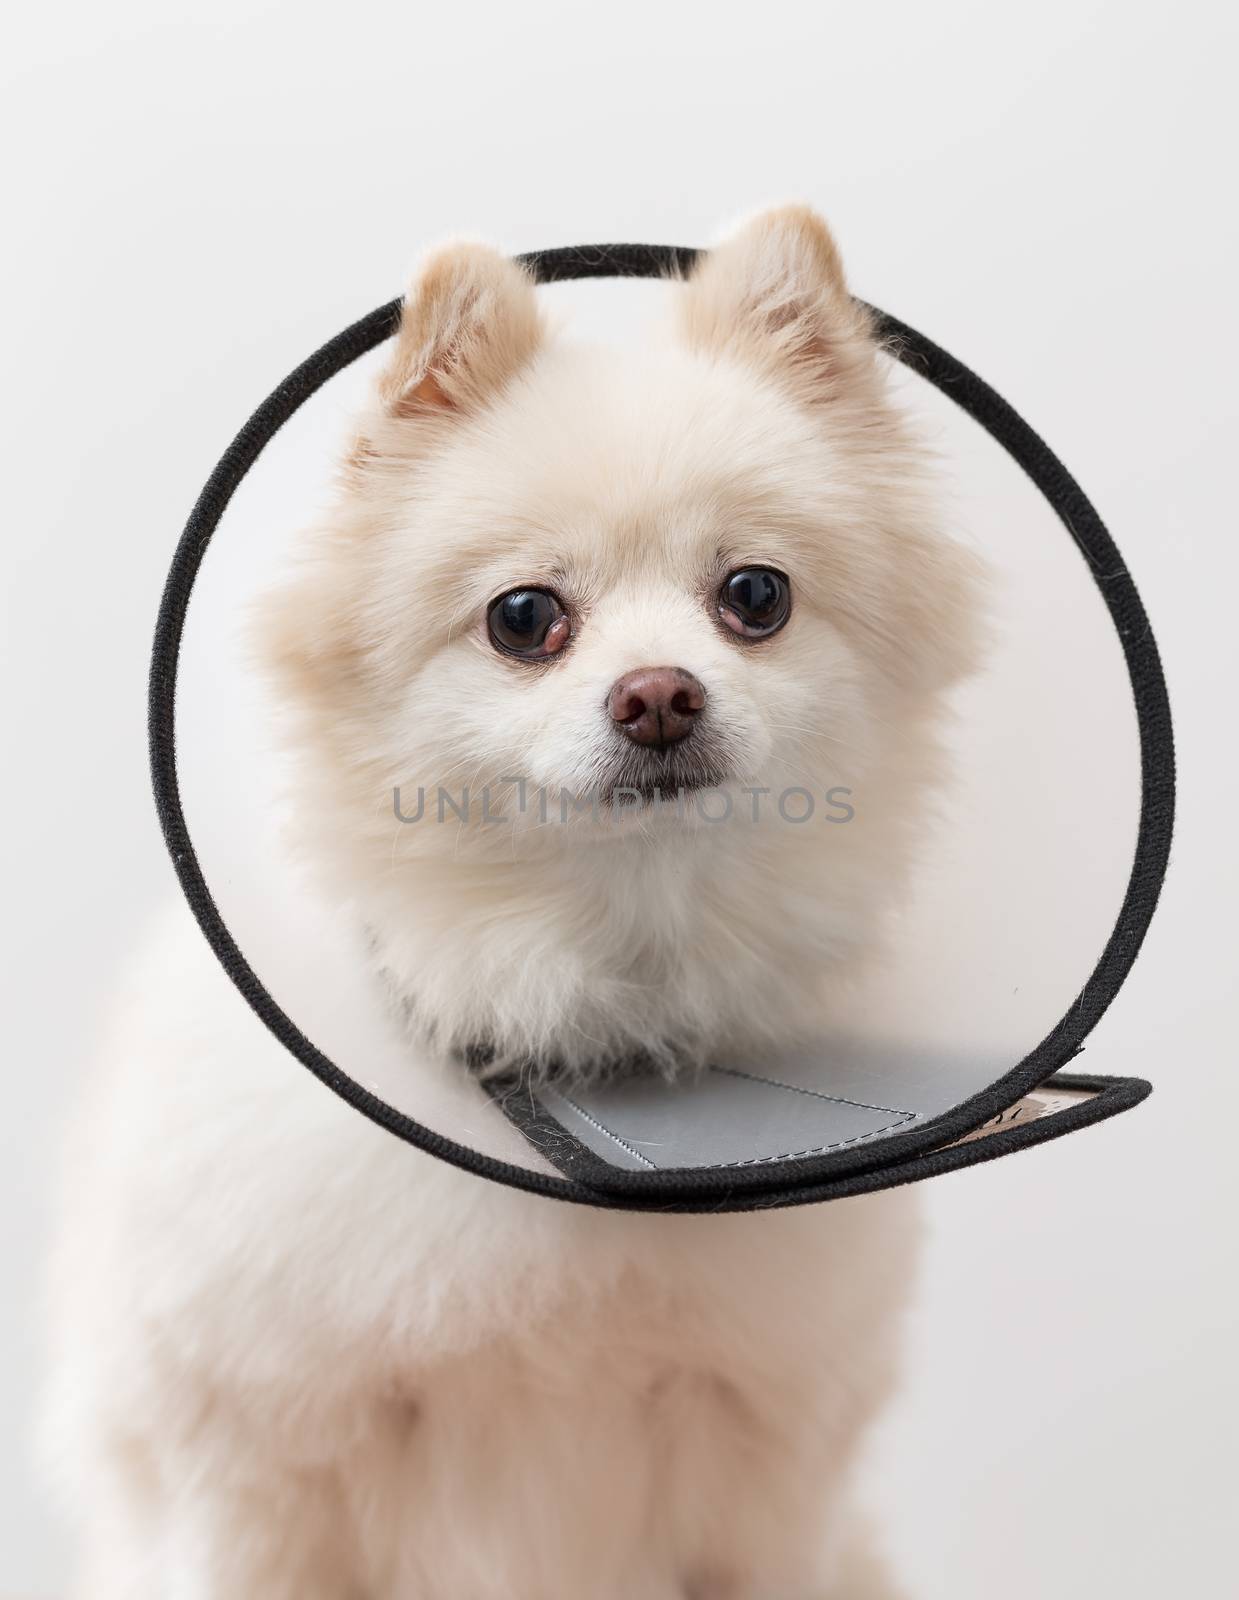 White pomeranian dog with protective collar